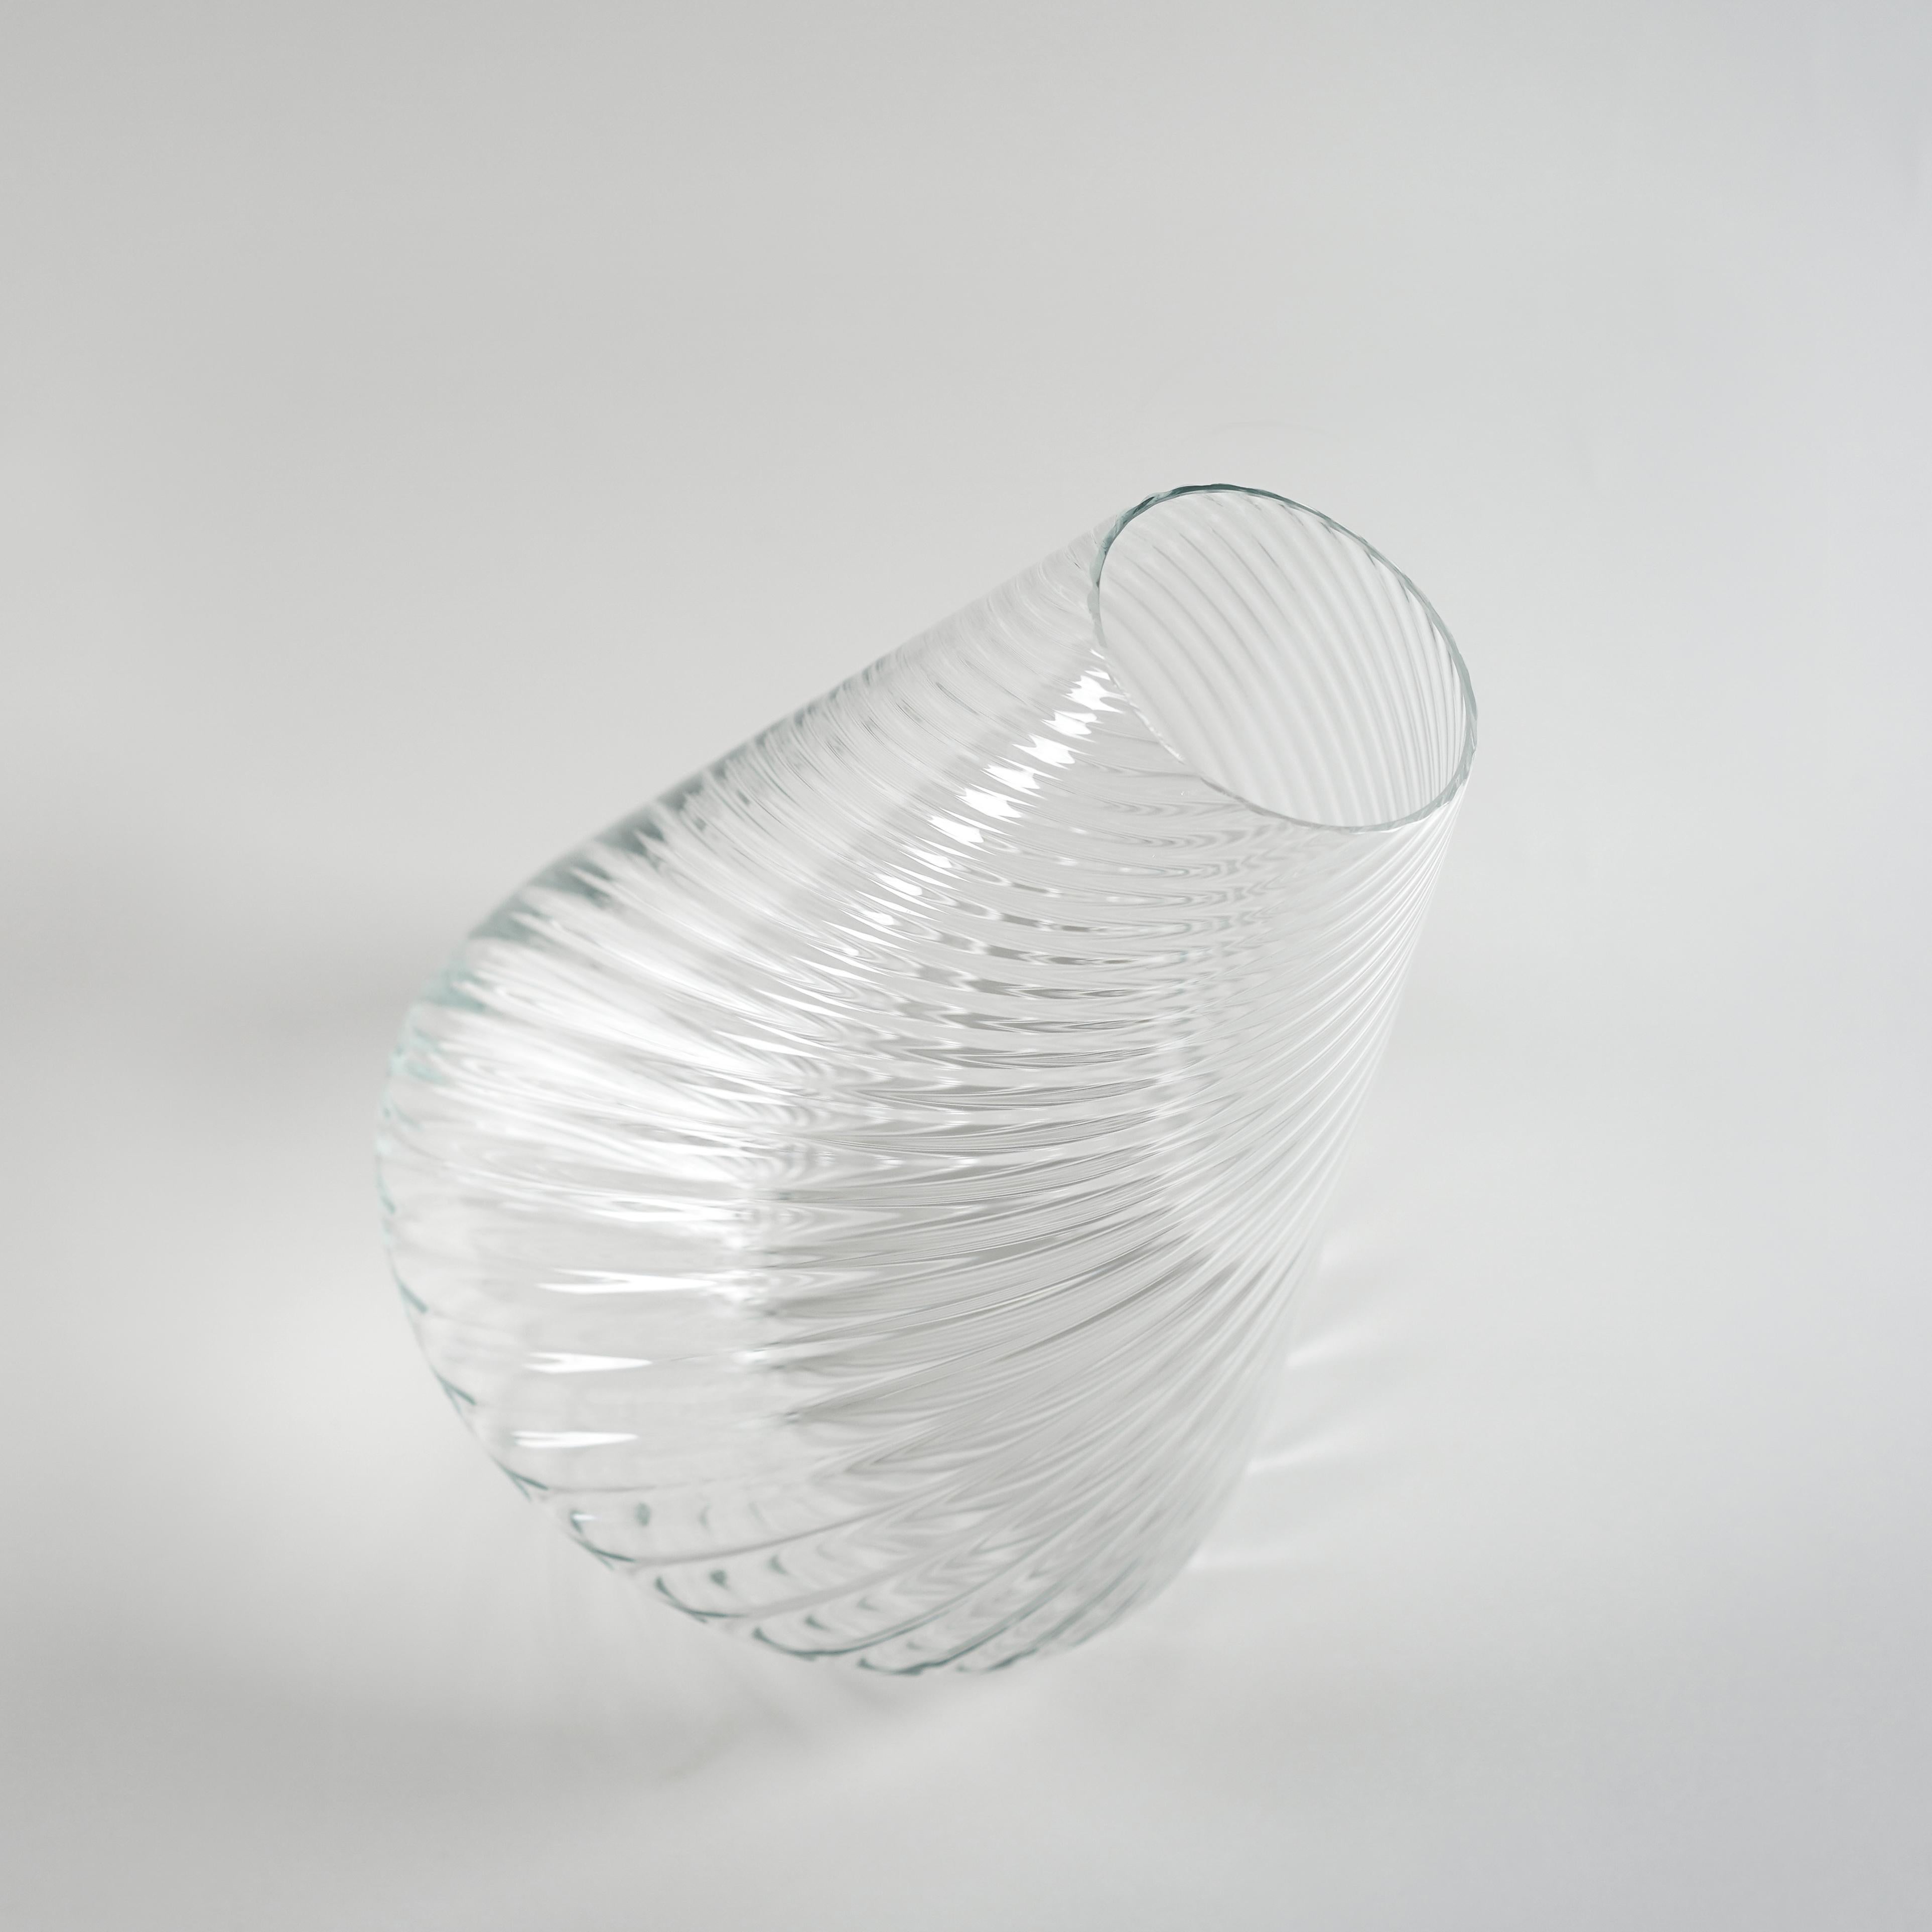 Who says a glass vase has to be static? That was the question that led me to create the spindle wheel glass vase.
The concept was movement. I wanted that a still piece like a vase could suggest the idea of motion, of spinning. 
The spindle wheel